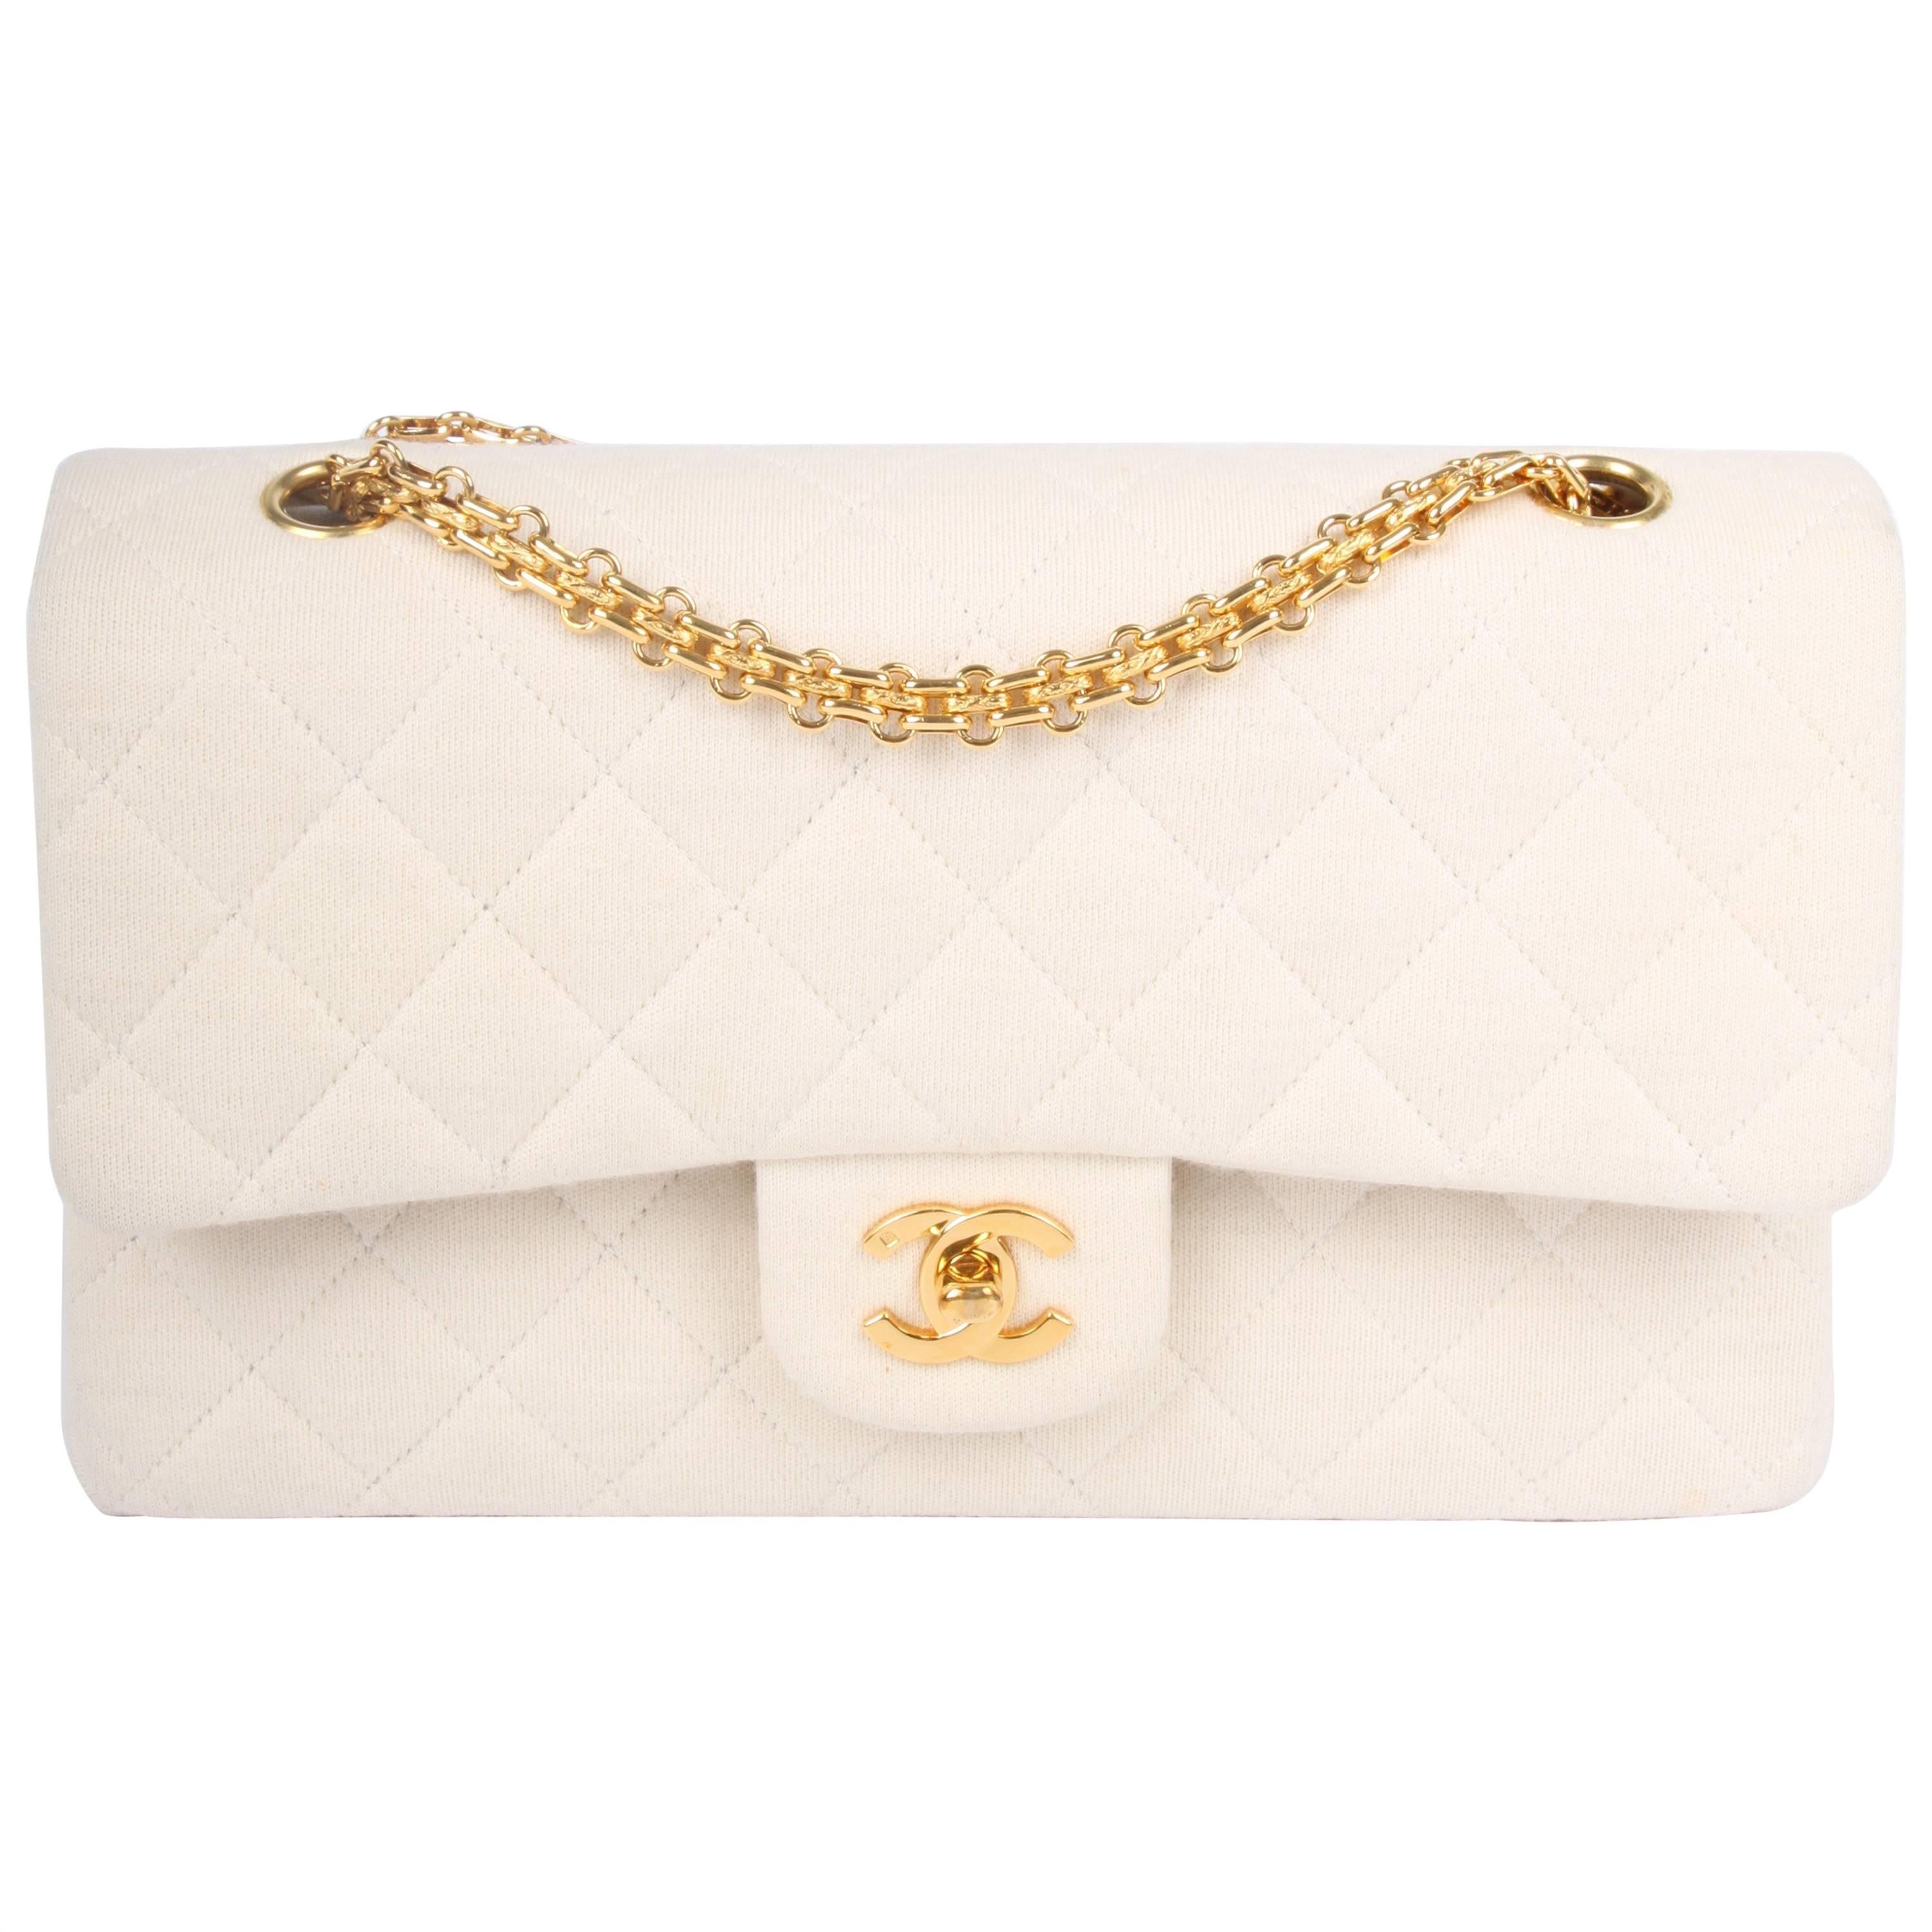 Chanel 2.55 Reissue Medium Double Flap Bag Jersey - ivory white 1996/1997